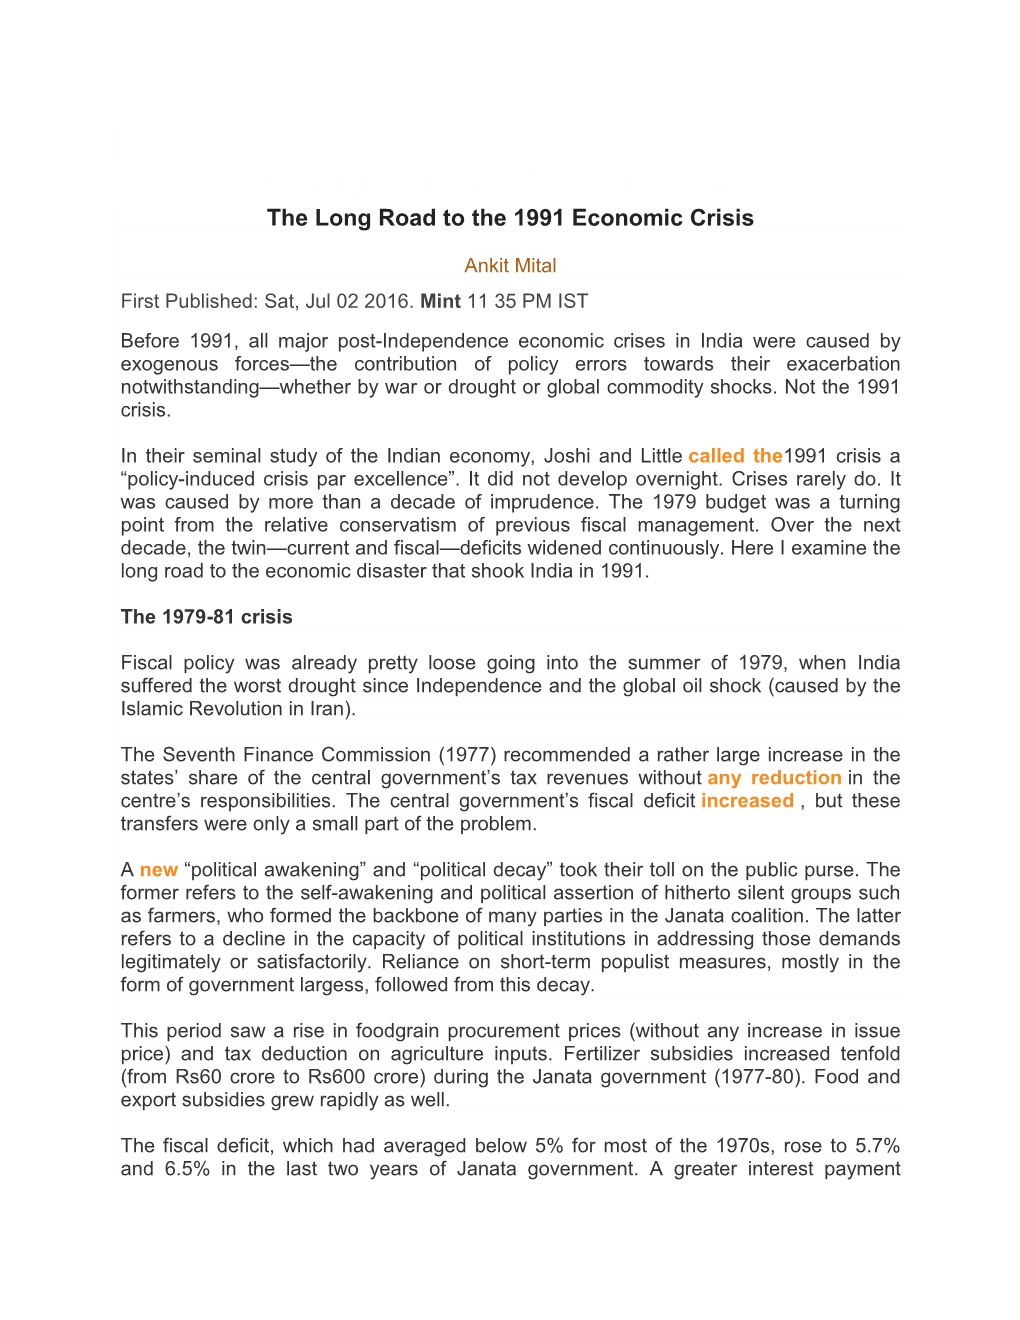 The Long Road to the 1991 Economic Crisis the Long Road to the 1991 Economic Crisis the Long Road to the 1991 Economic Crisis